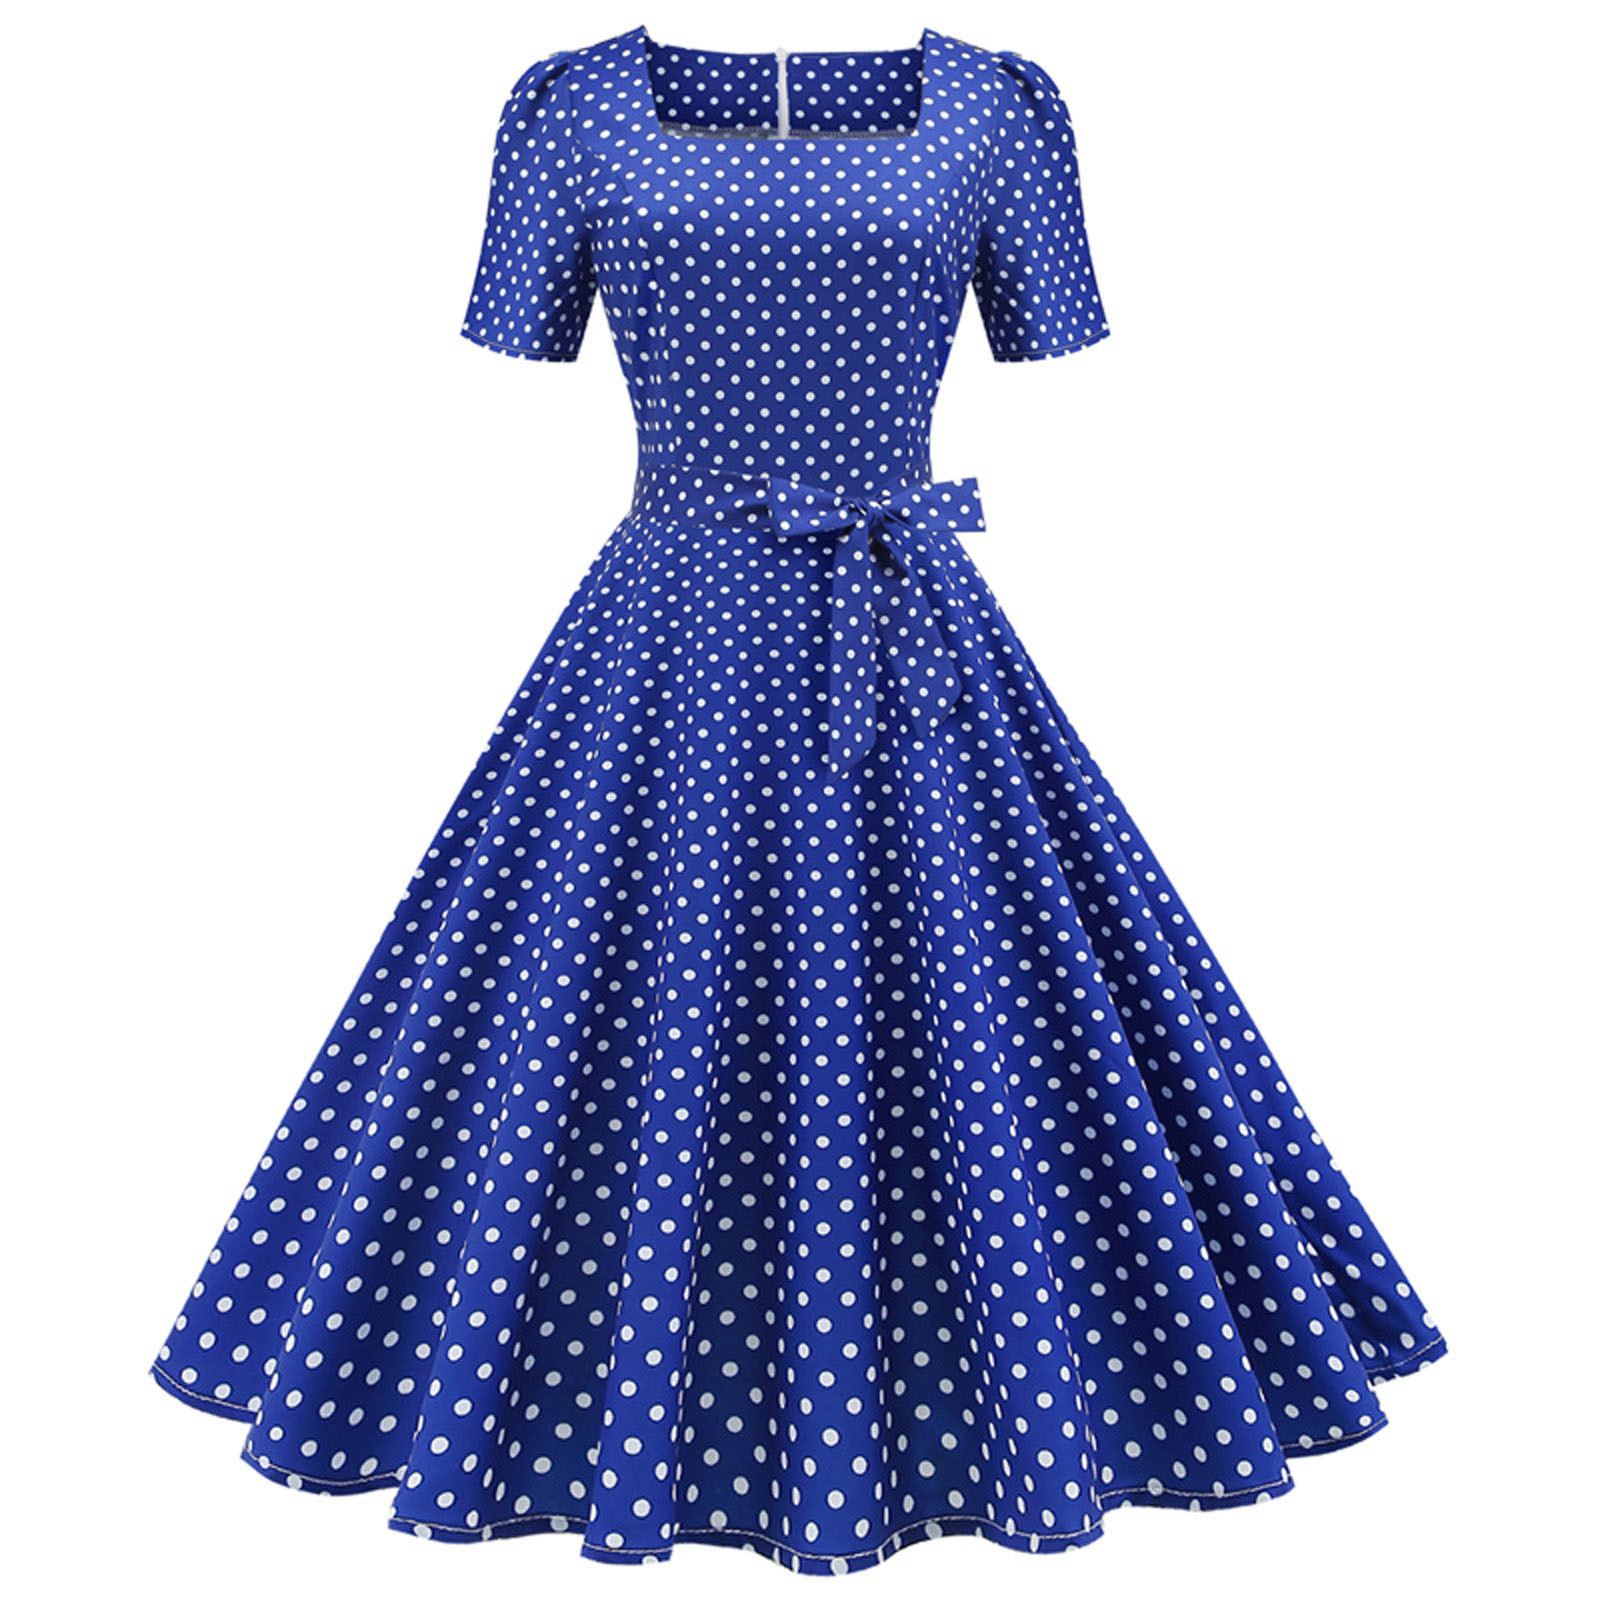 Womens Polka Dot Dress 1950s Vintage Rockabilly Flowy Dresses Short Sleeve Cocktail Prom Party Dress for Women 2023 - image 1 of 4